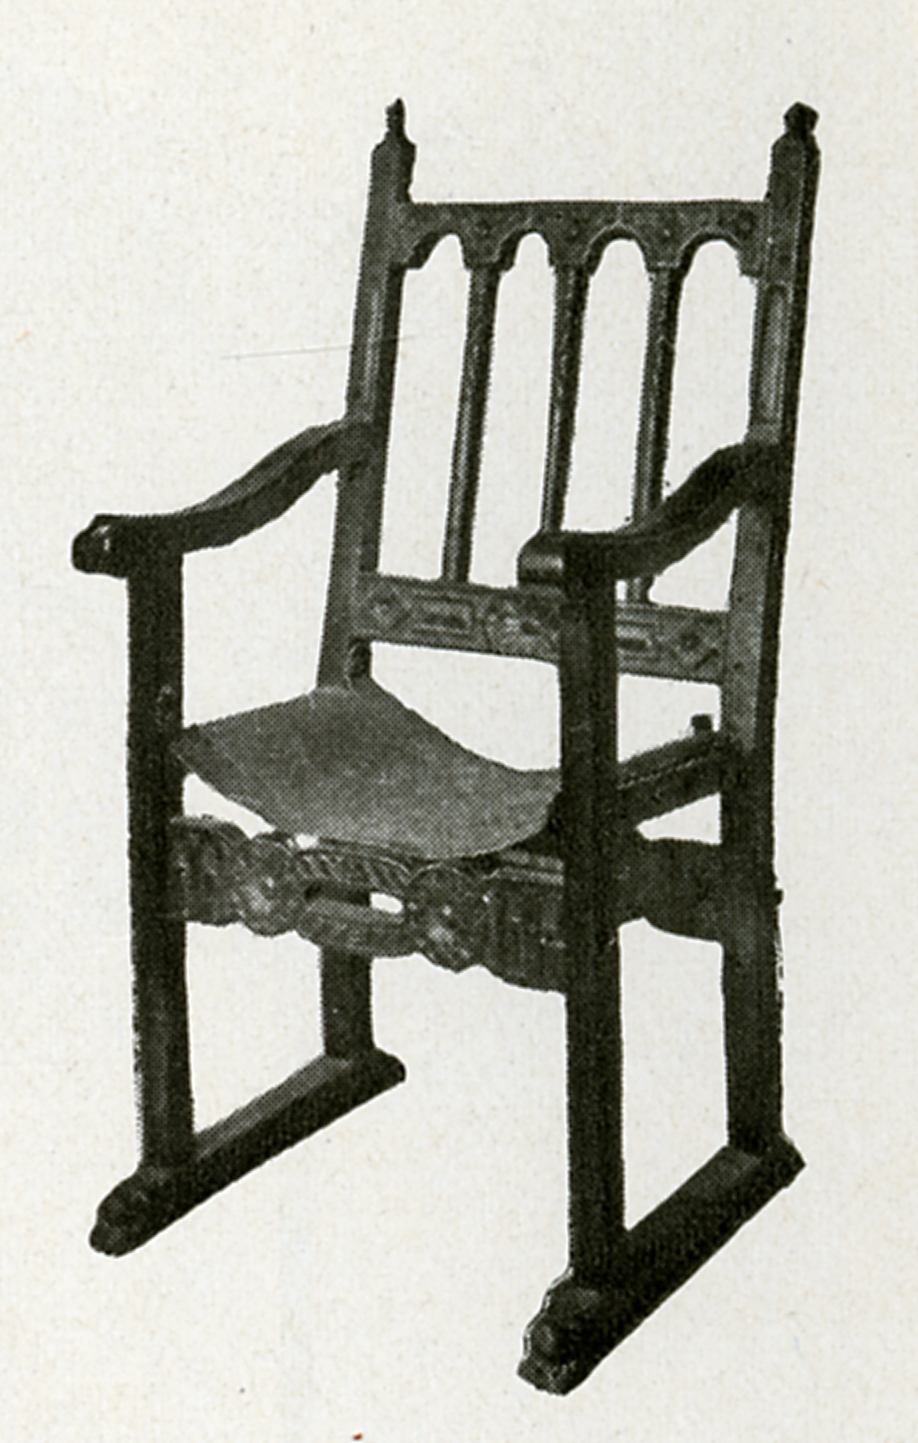 16th Century Spanish chair with slung leather seat, from H.D. Eberlein and A. McClure, “Spanish Tables and Seating Furniture of the 16th and 17th Centuries,” House & Garden Vol. 33 (Feb. 1918), p. 39. TRRF Library